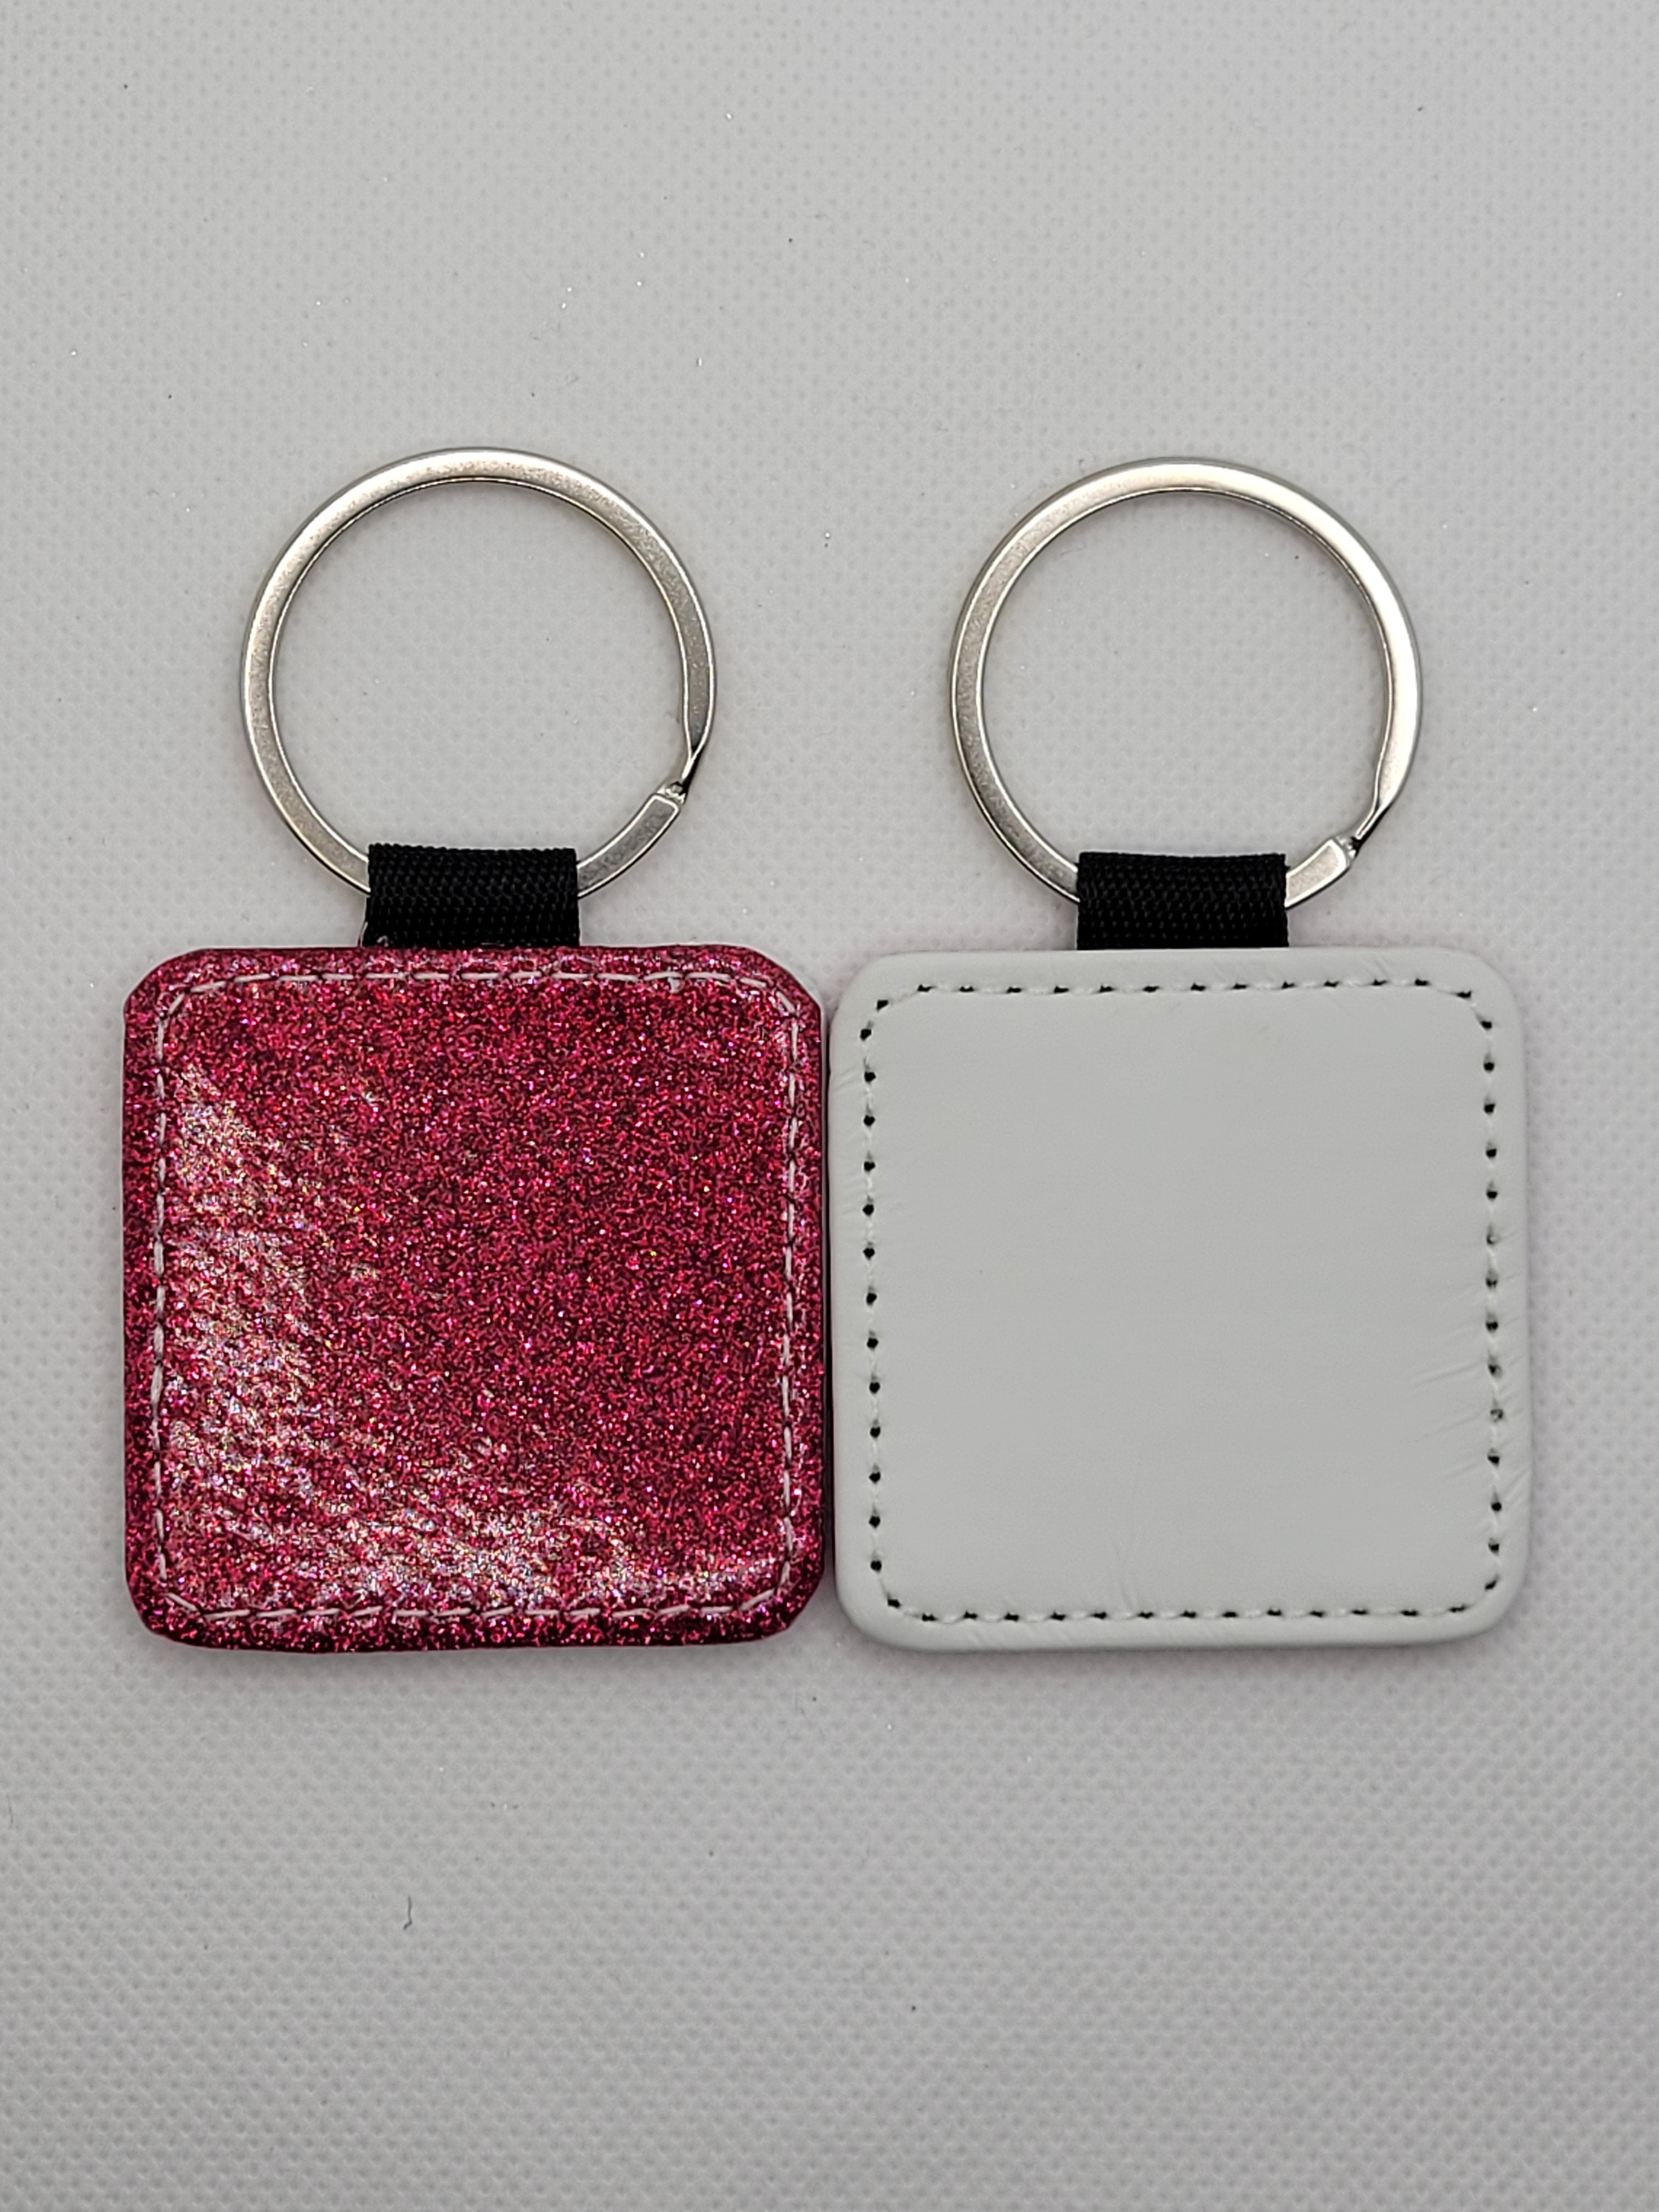 RENWILLS Sublimation Keychains Square - Hot Pink